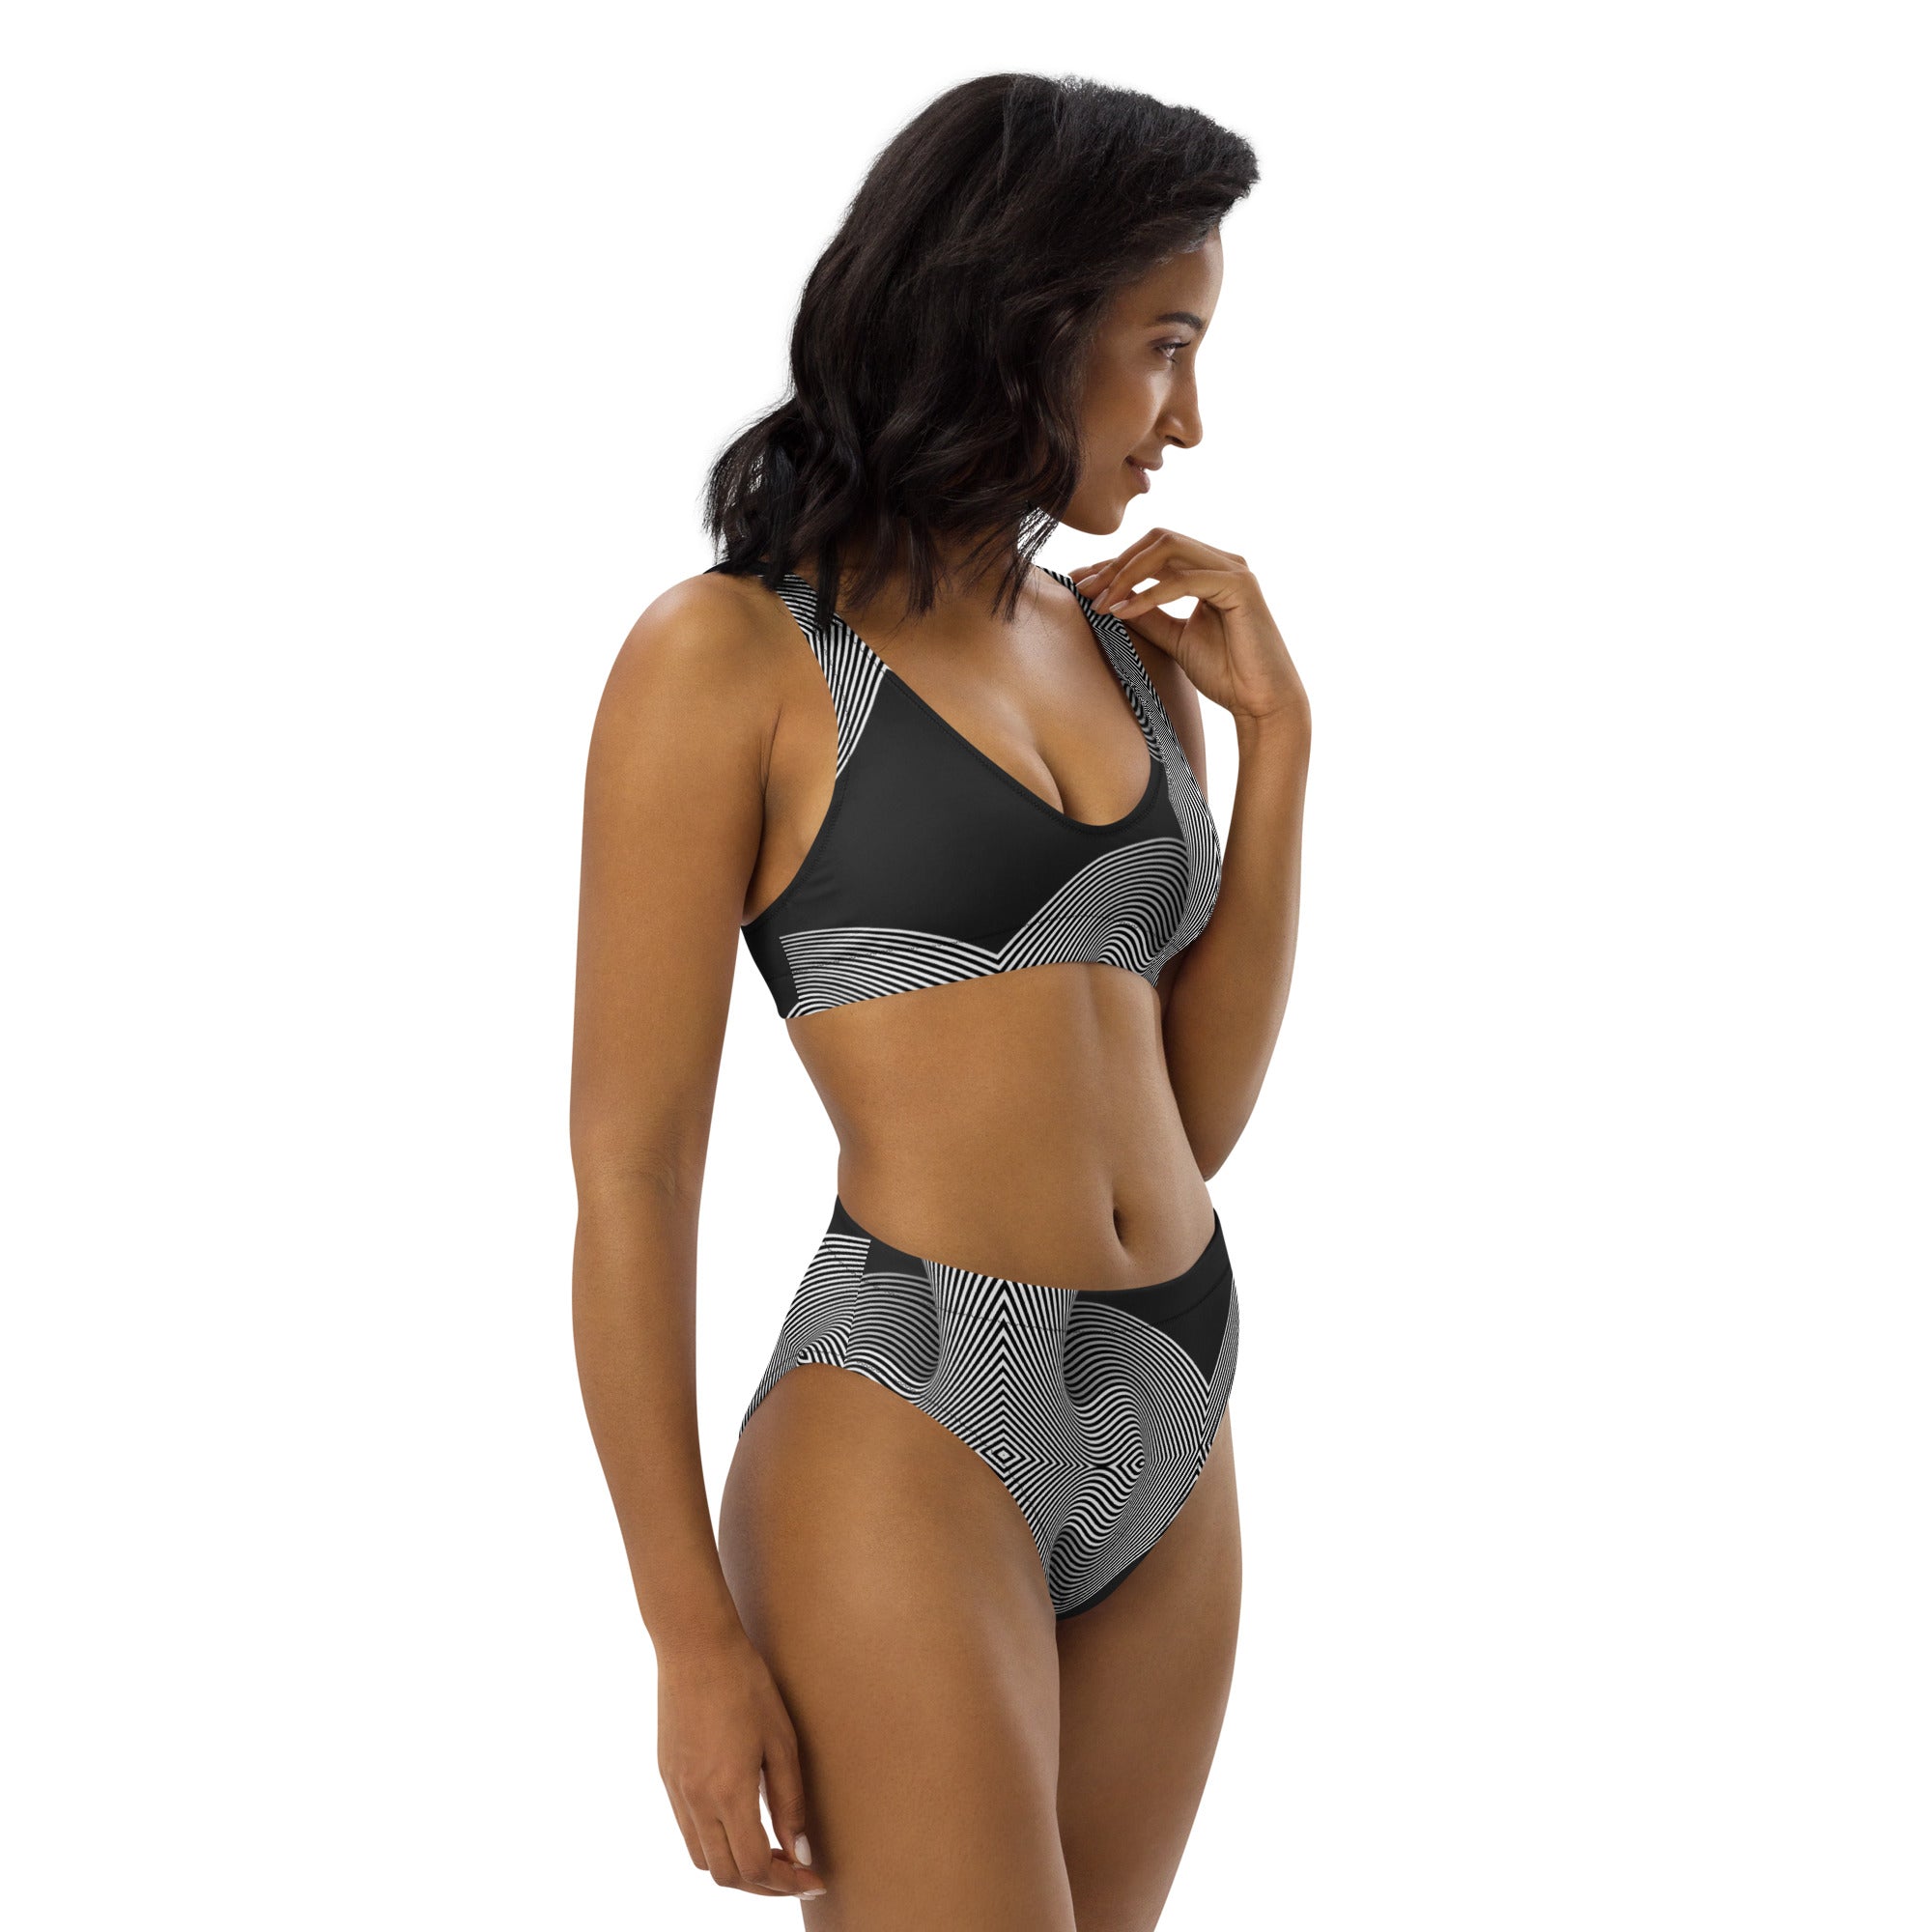 Black and White Curves, Recycled high-waisted bikini, by Sensus Studio Design